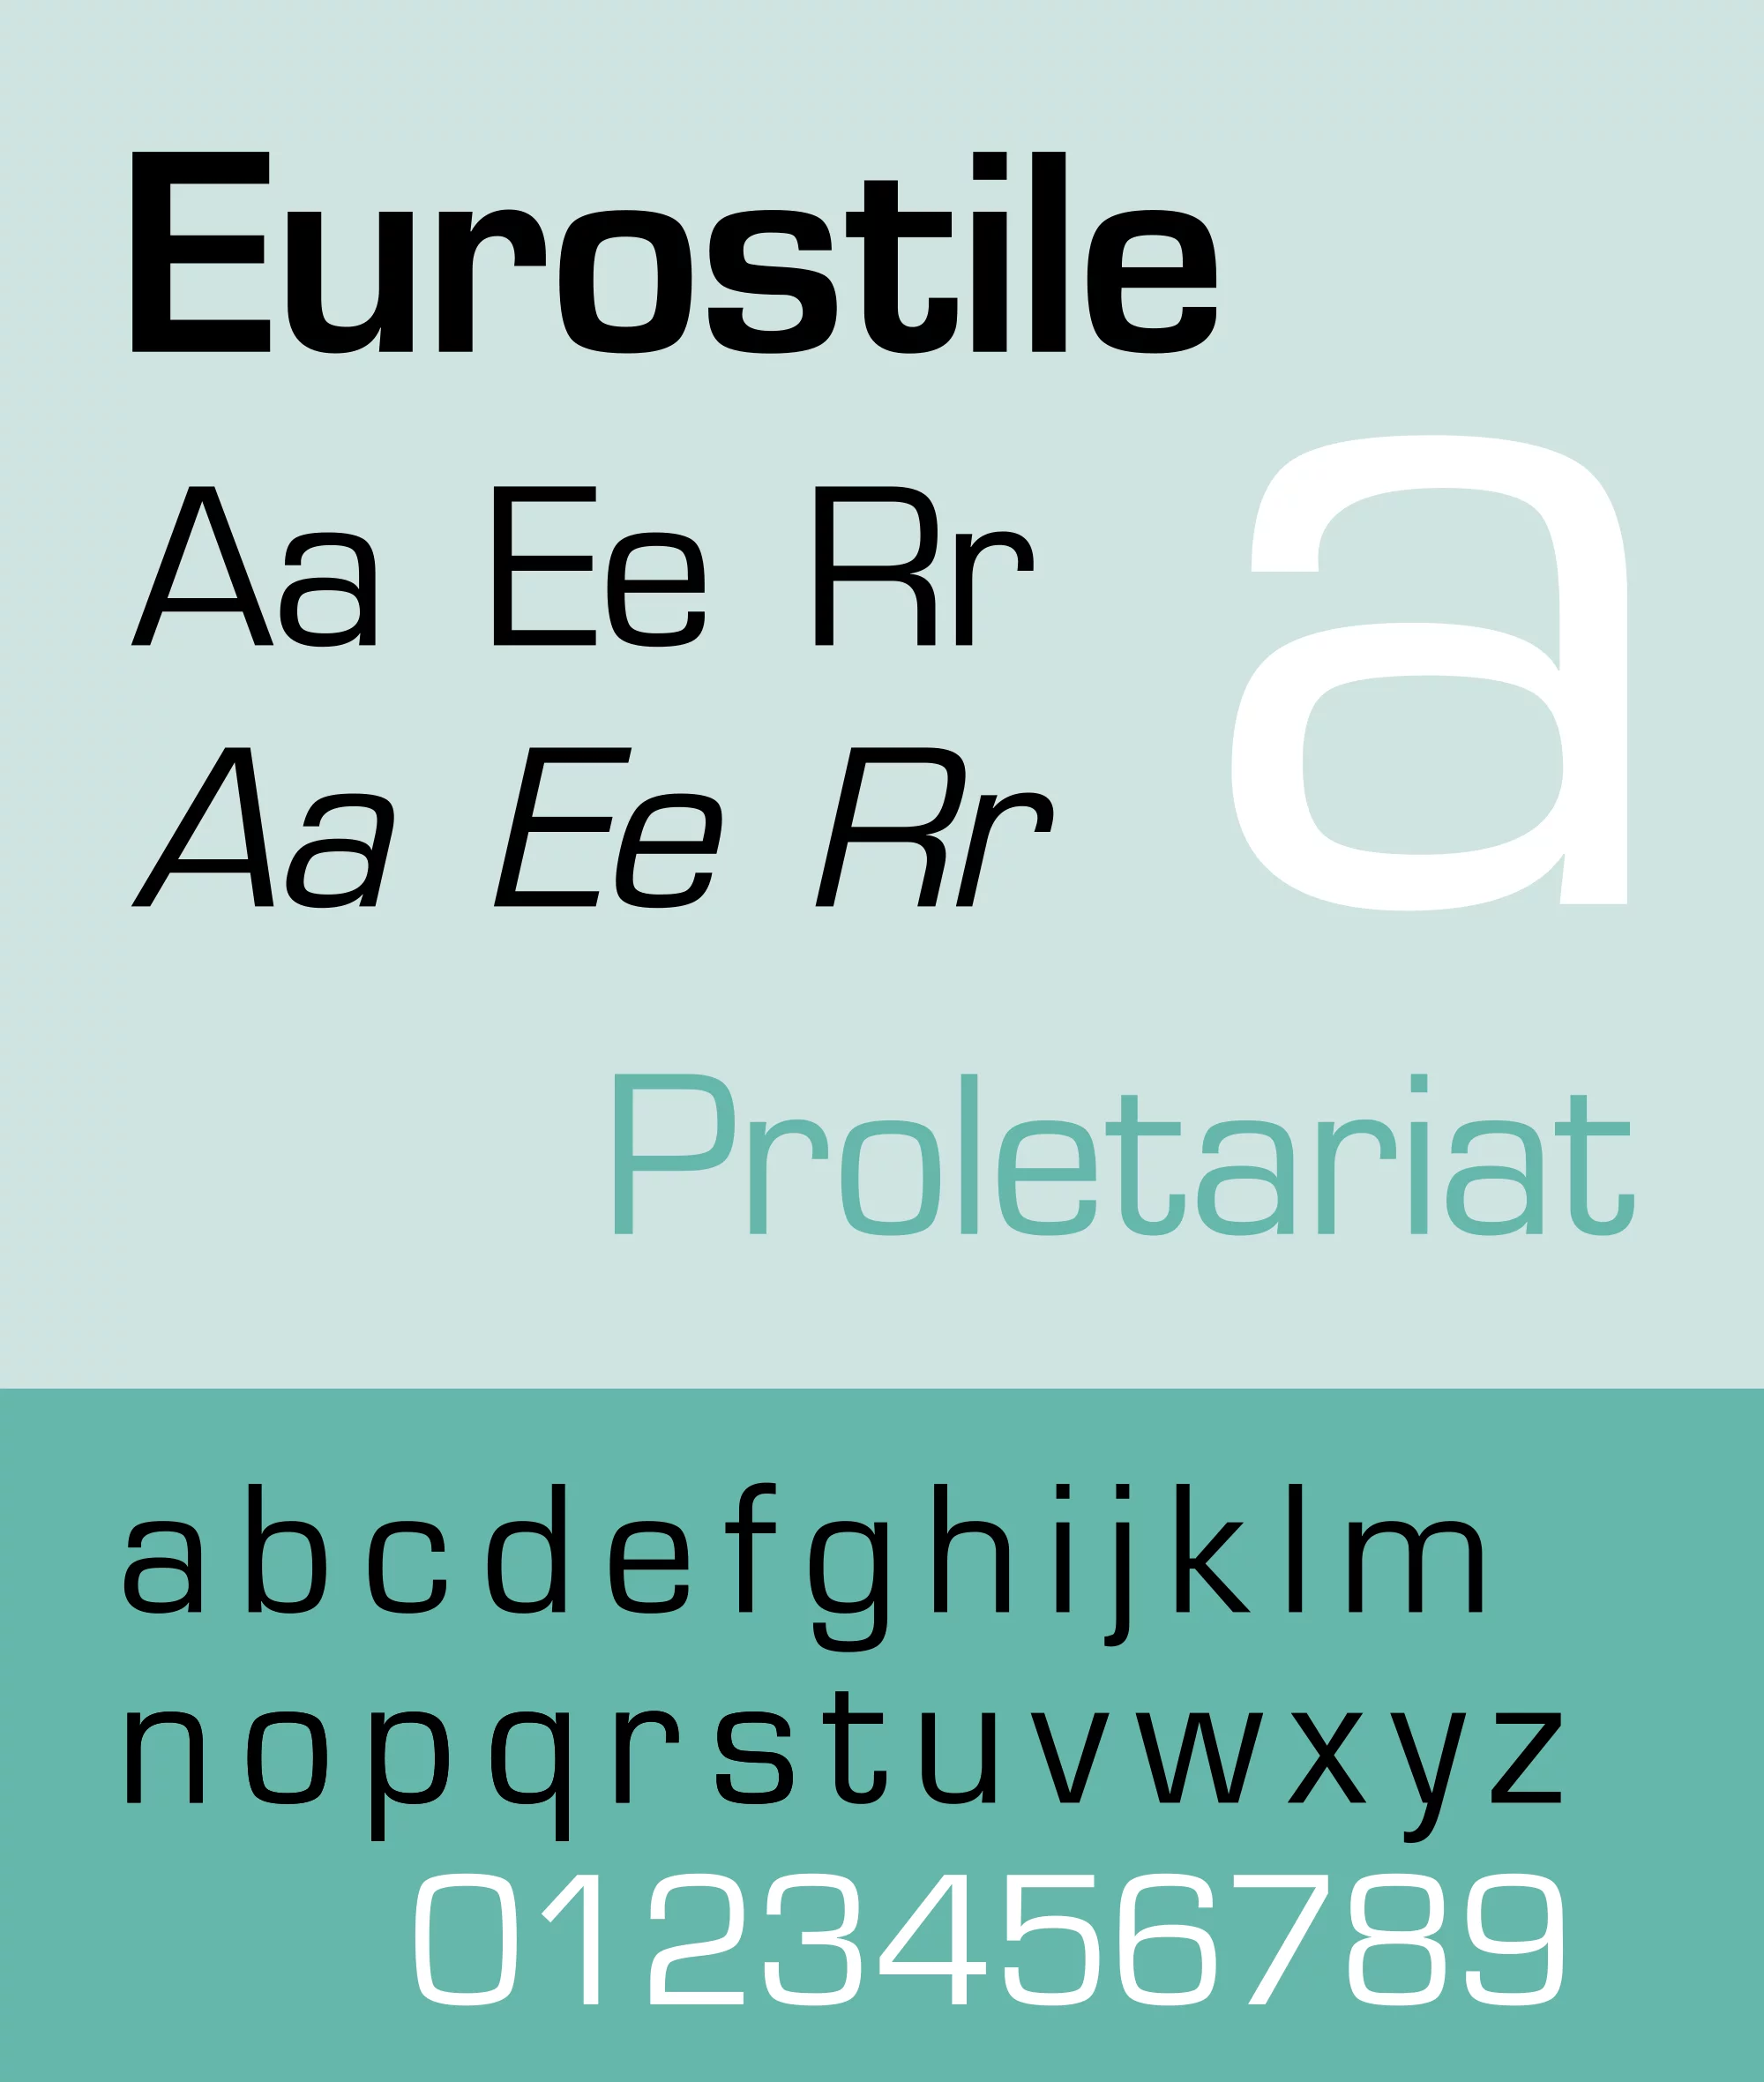 25 most used typefaces in advertising: Eurostile